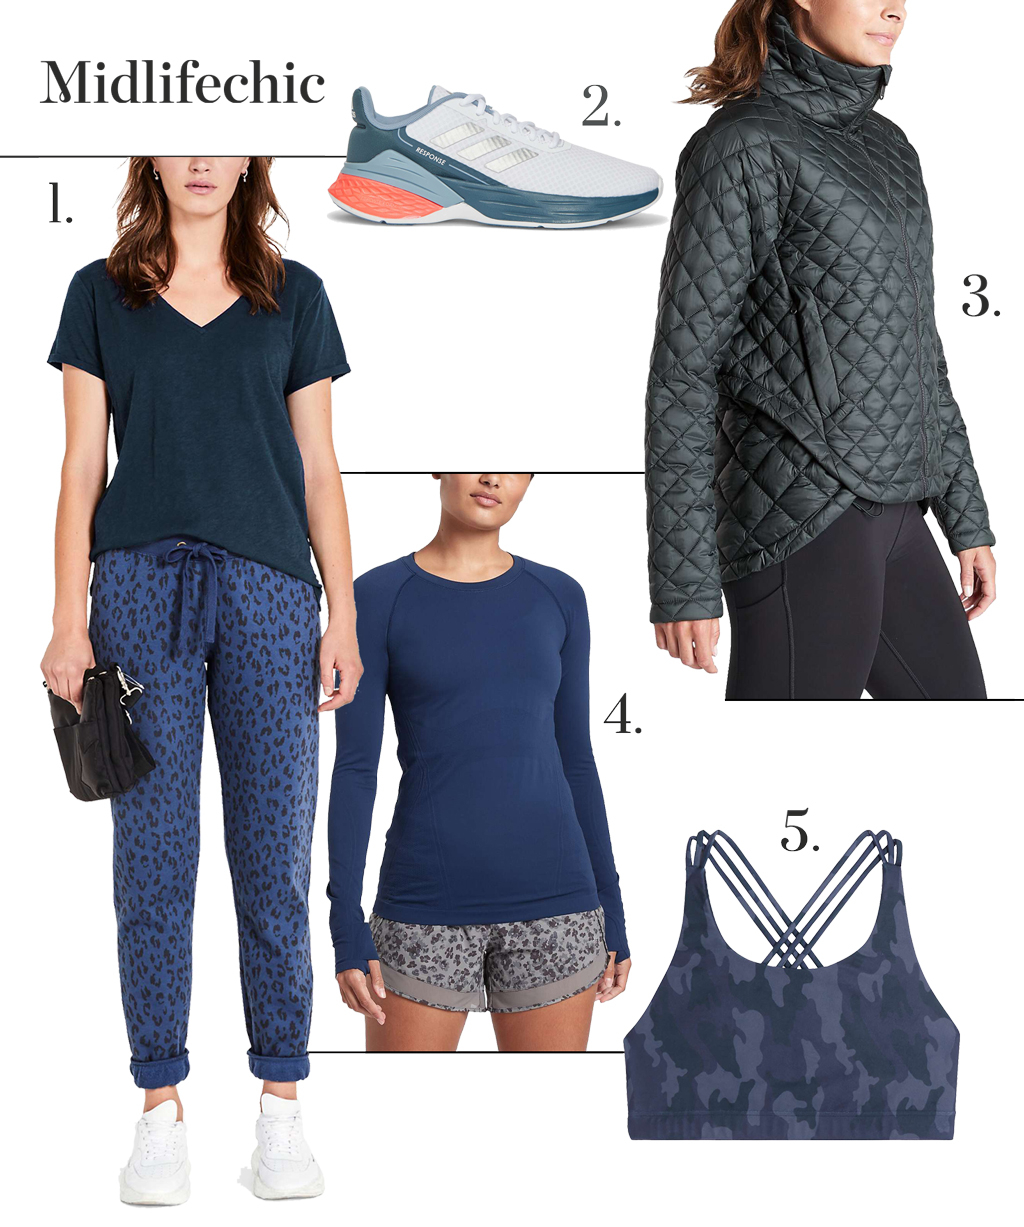 Exercise Clothes, Fashion Over 40